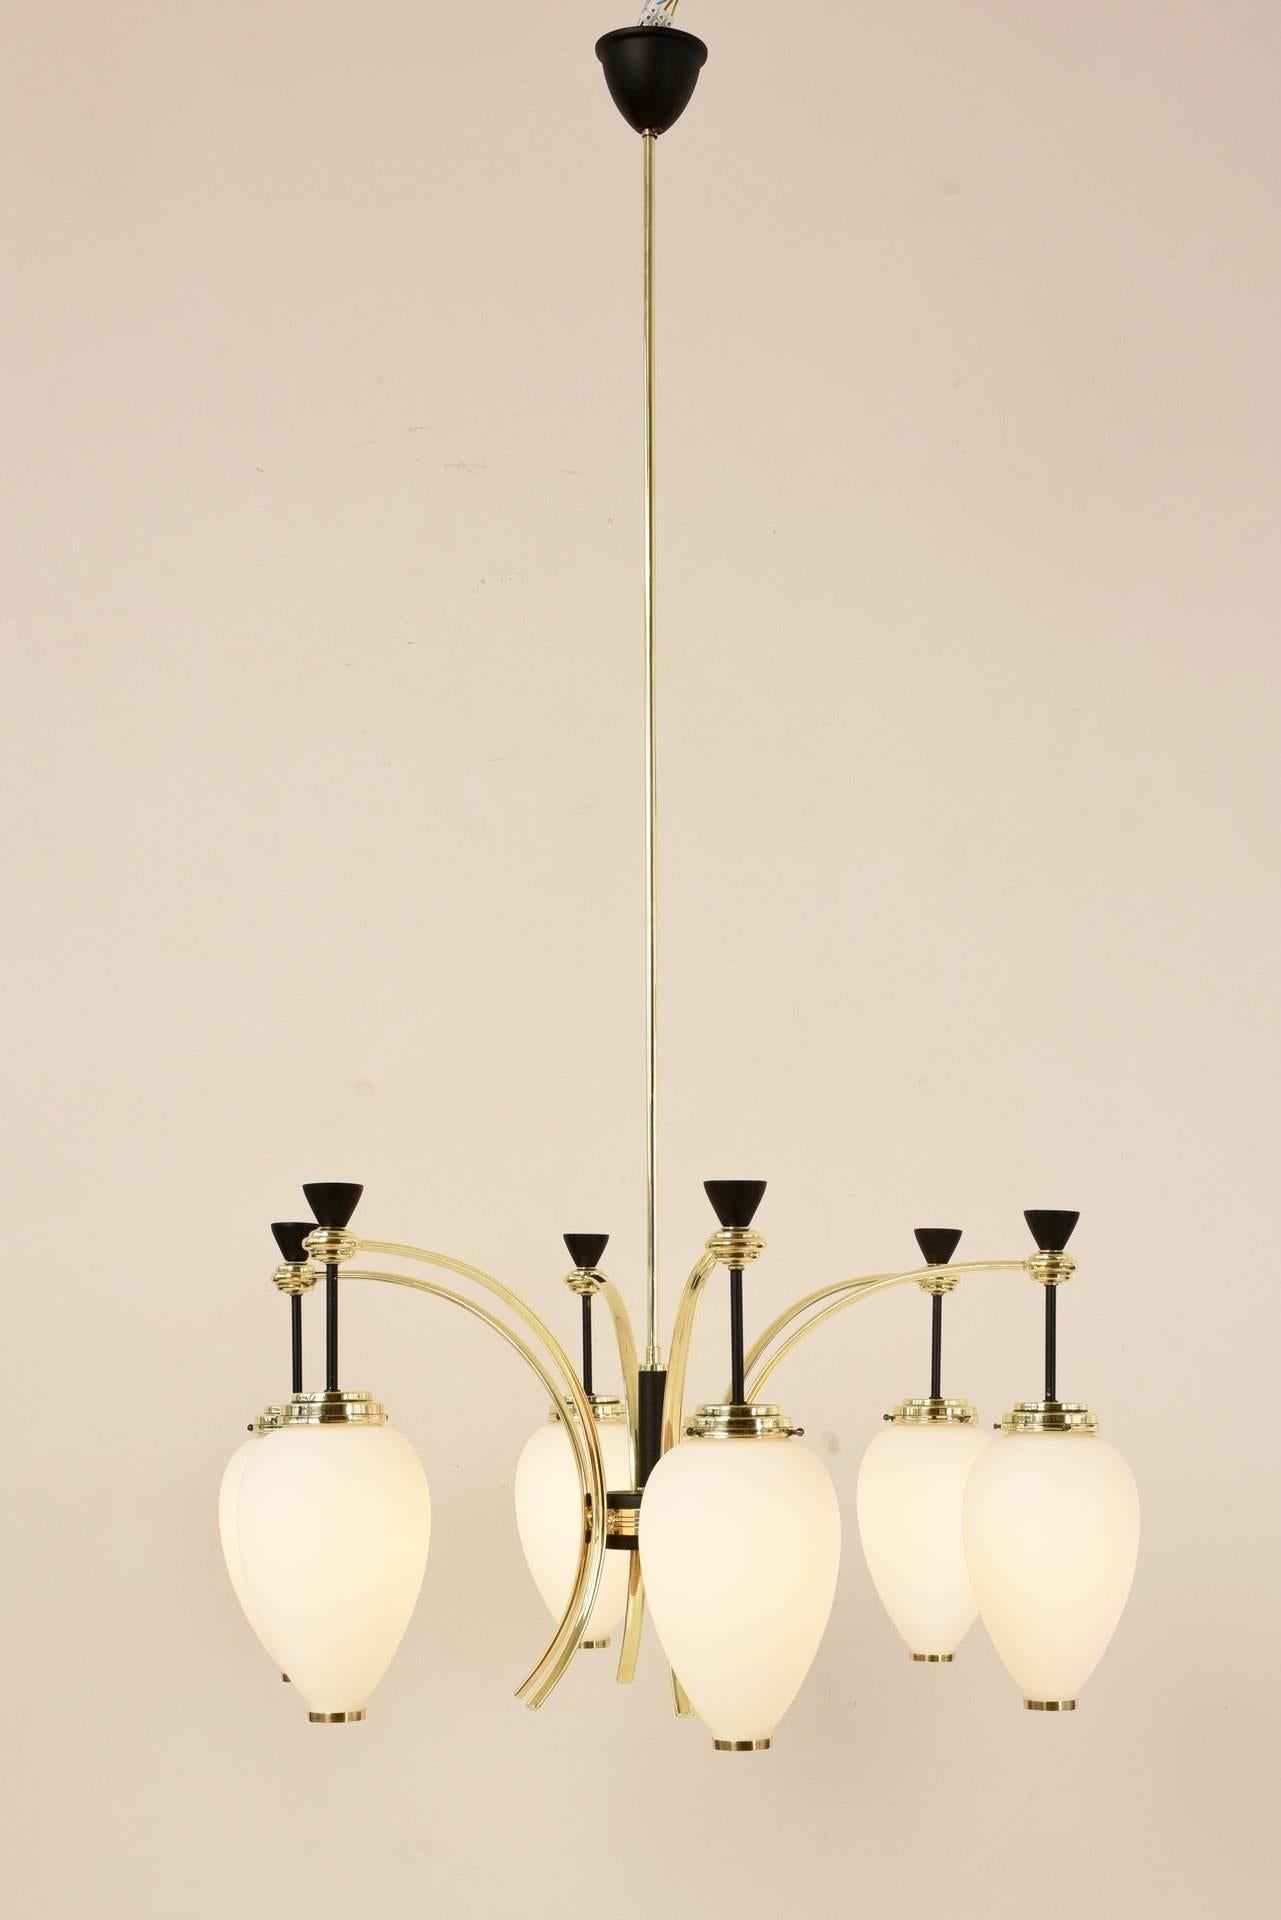 This rare and splendid chandelier by Stilnovo is a representative and at the same time finely designed ceiling light. The frosted glass of the reflectors offers the best diffusion and is in Fine contrast to the polished brass of the montages and the